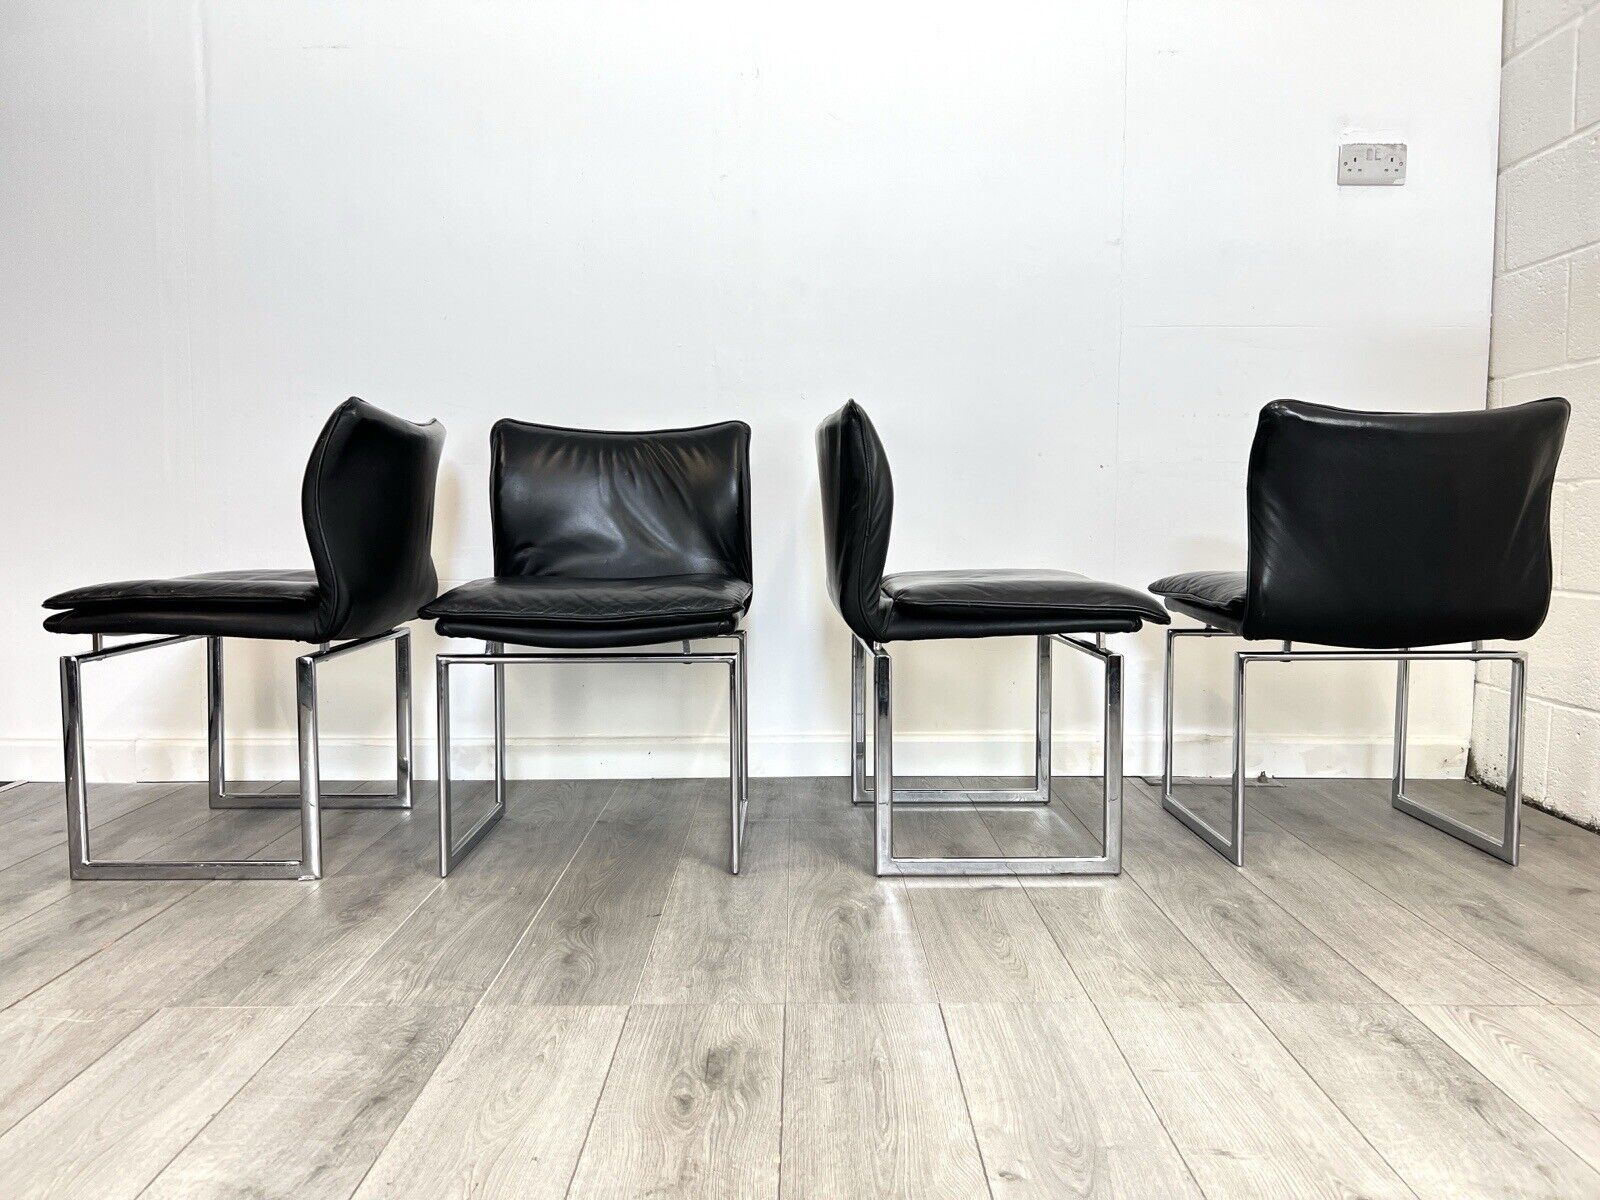 Pieff Epee, Set of 4 Chrome and Black Leather Dining Chairs